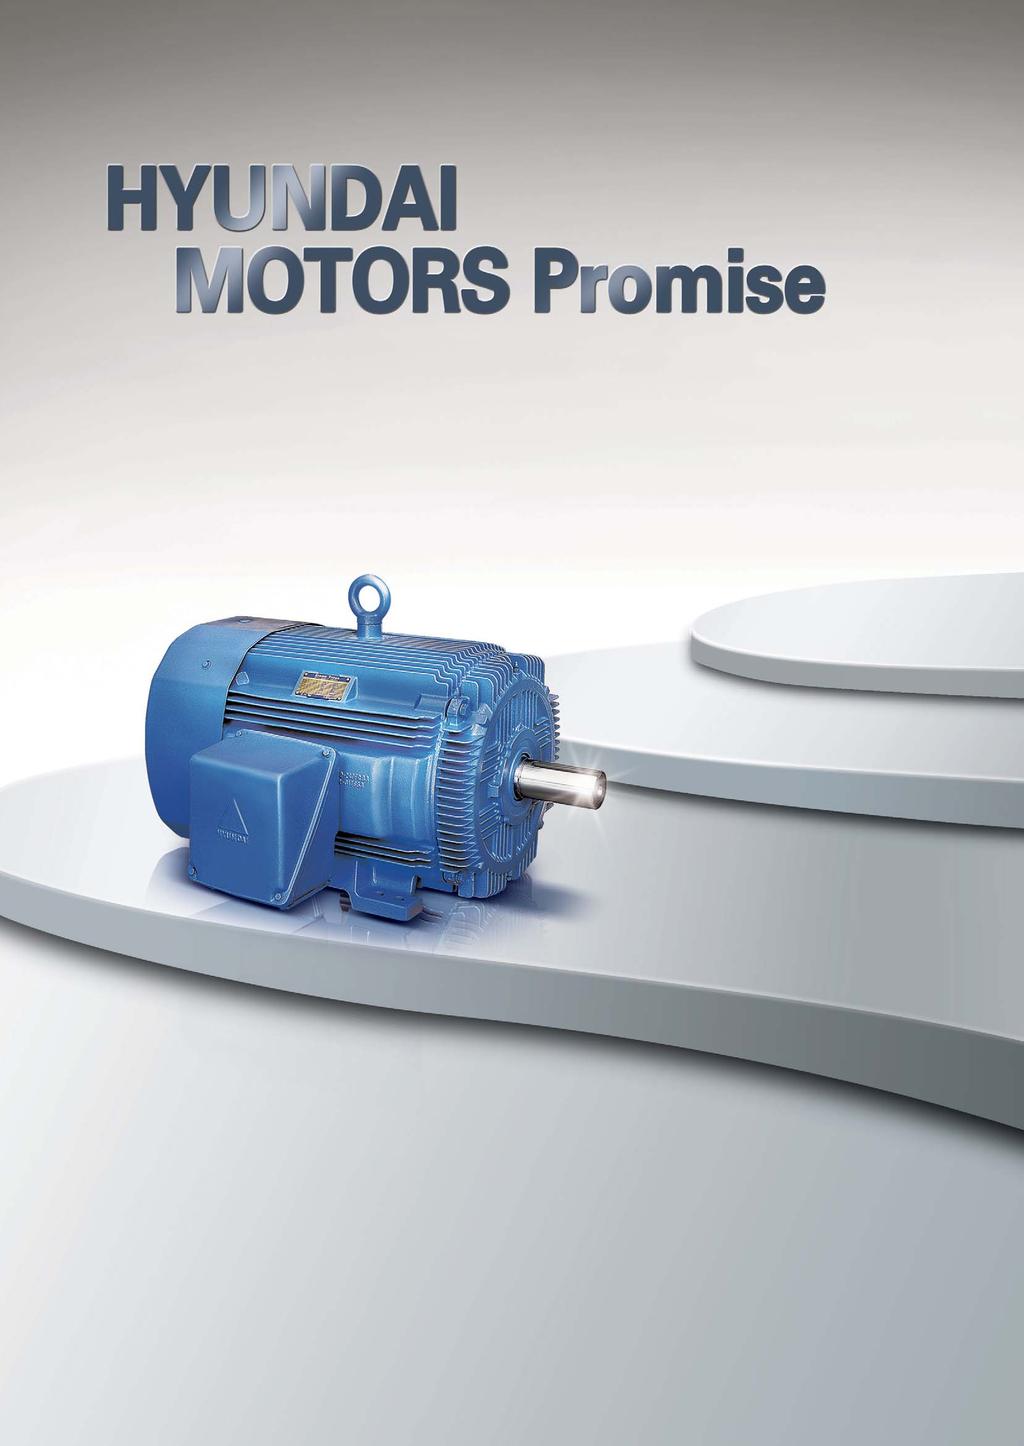 Continuous design evolutions for AC Induction Motors developed through years of